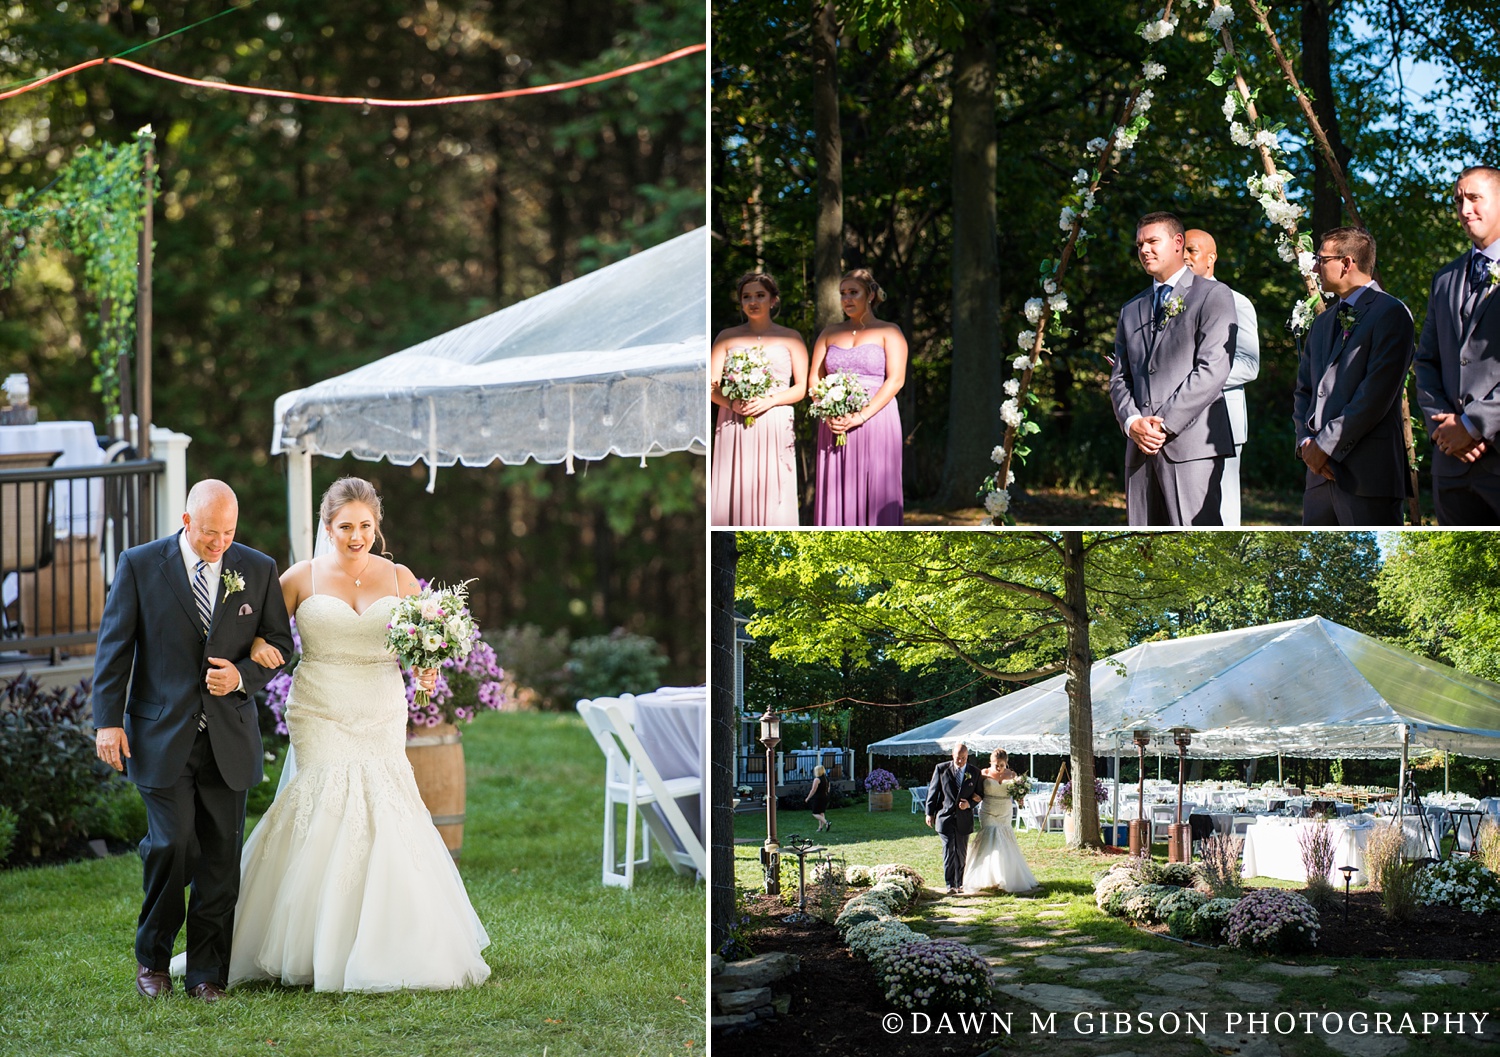 Photos by Dawn M Gibson Photography